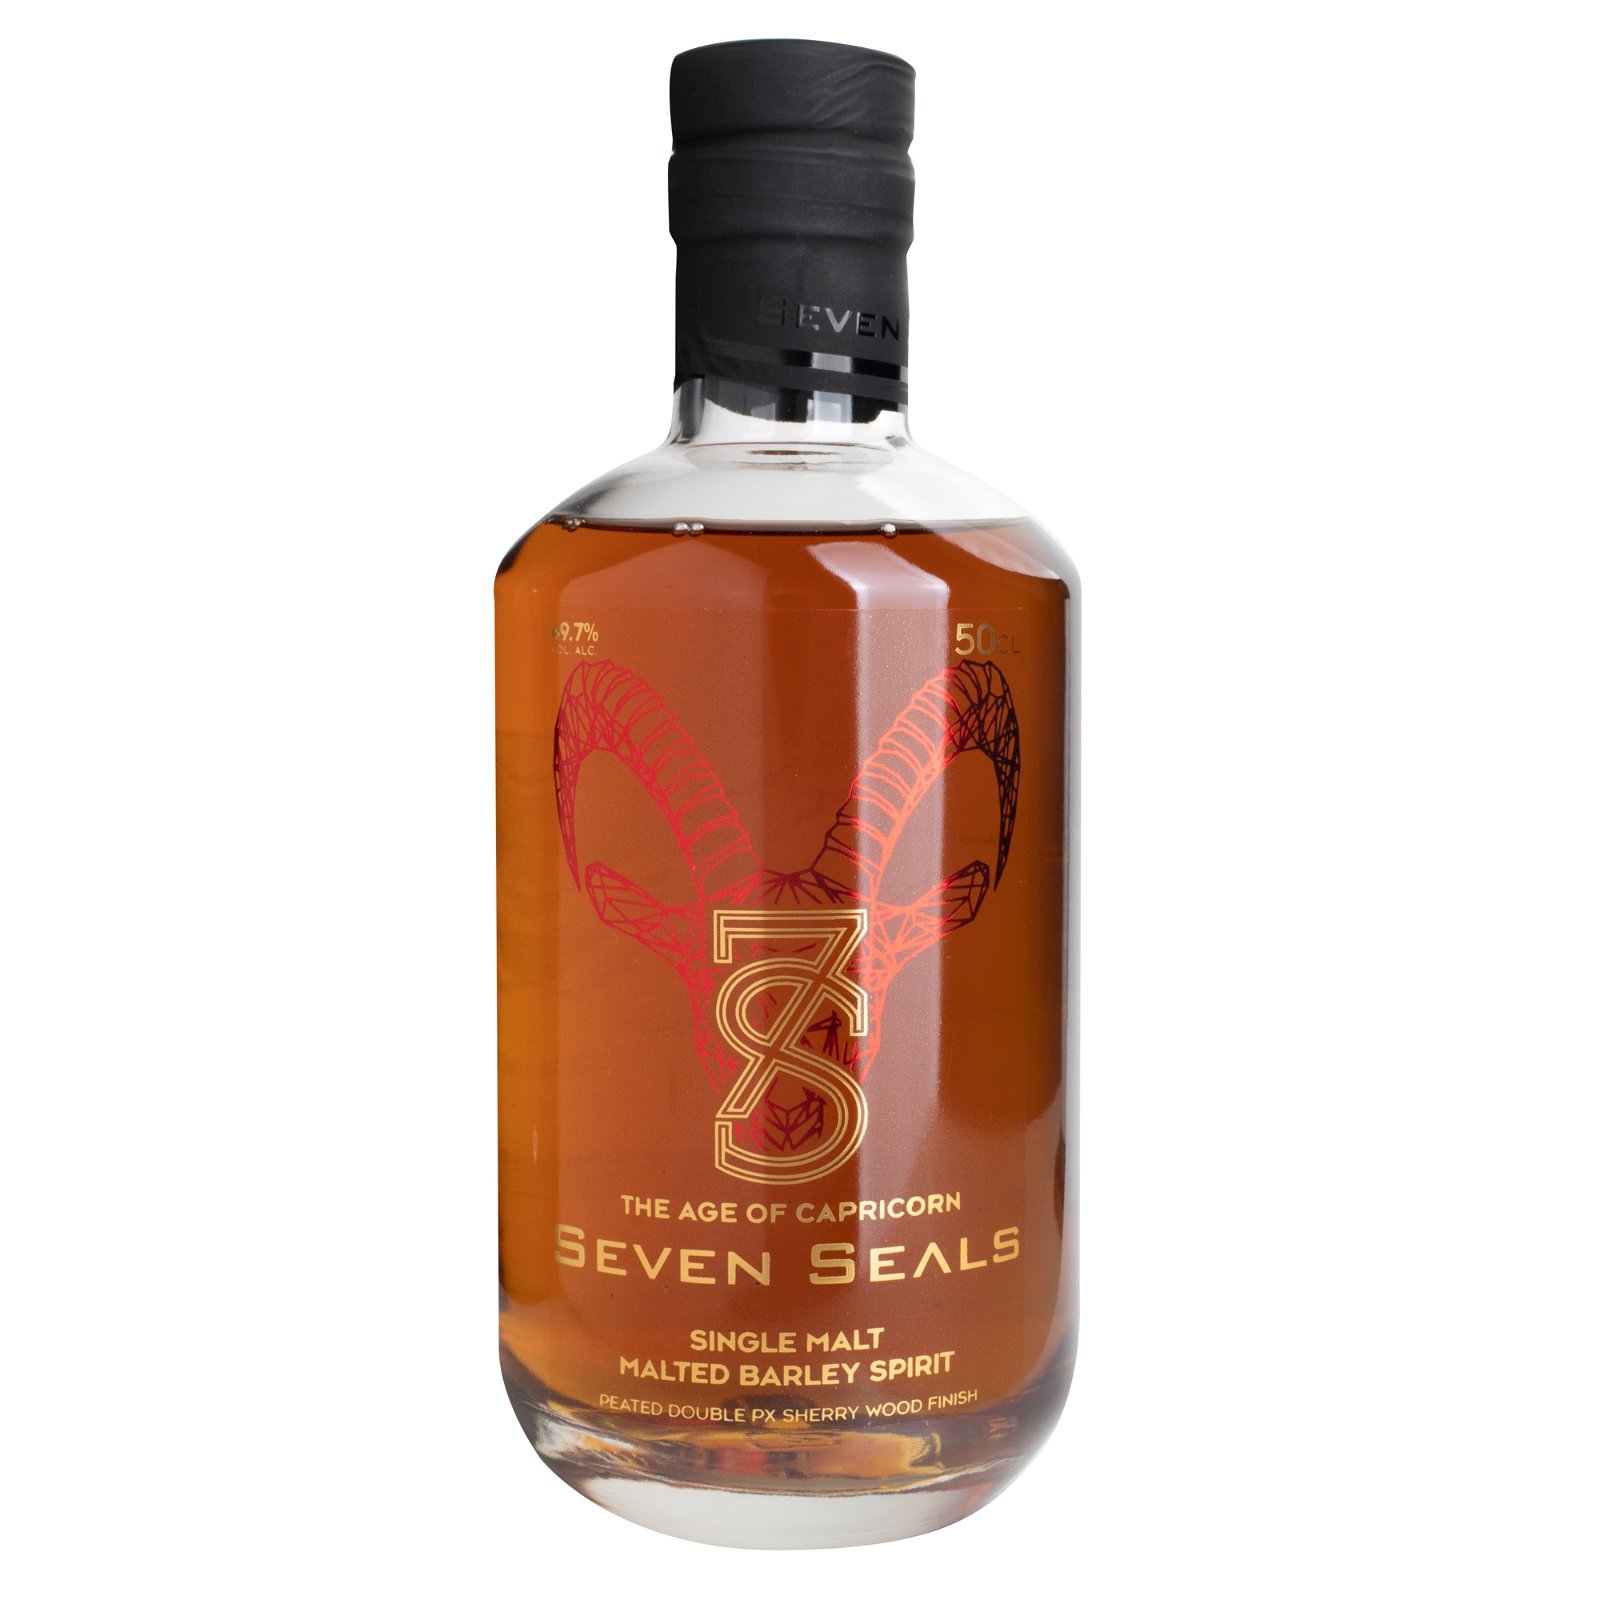 Seven Seals The Age of Capricorn Peated Double PX Sherry Wood Finish